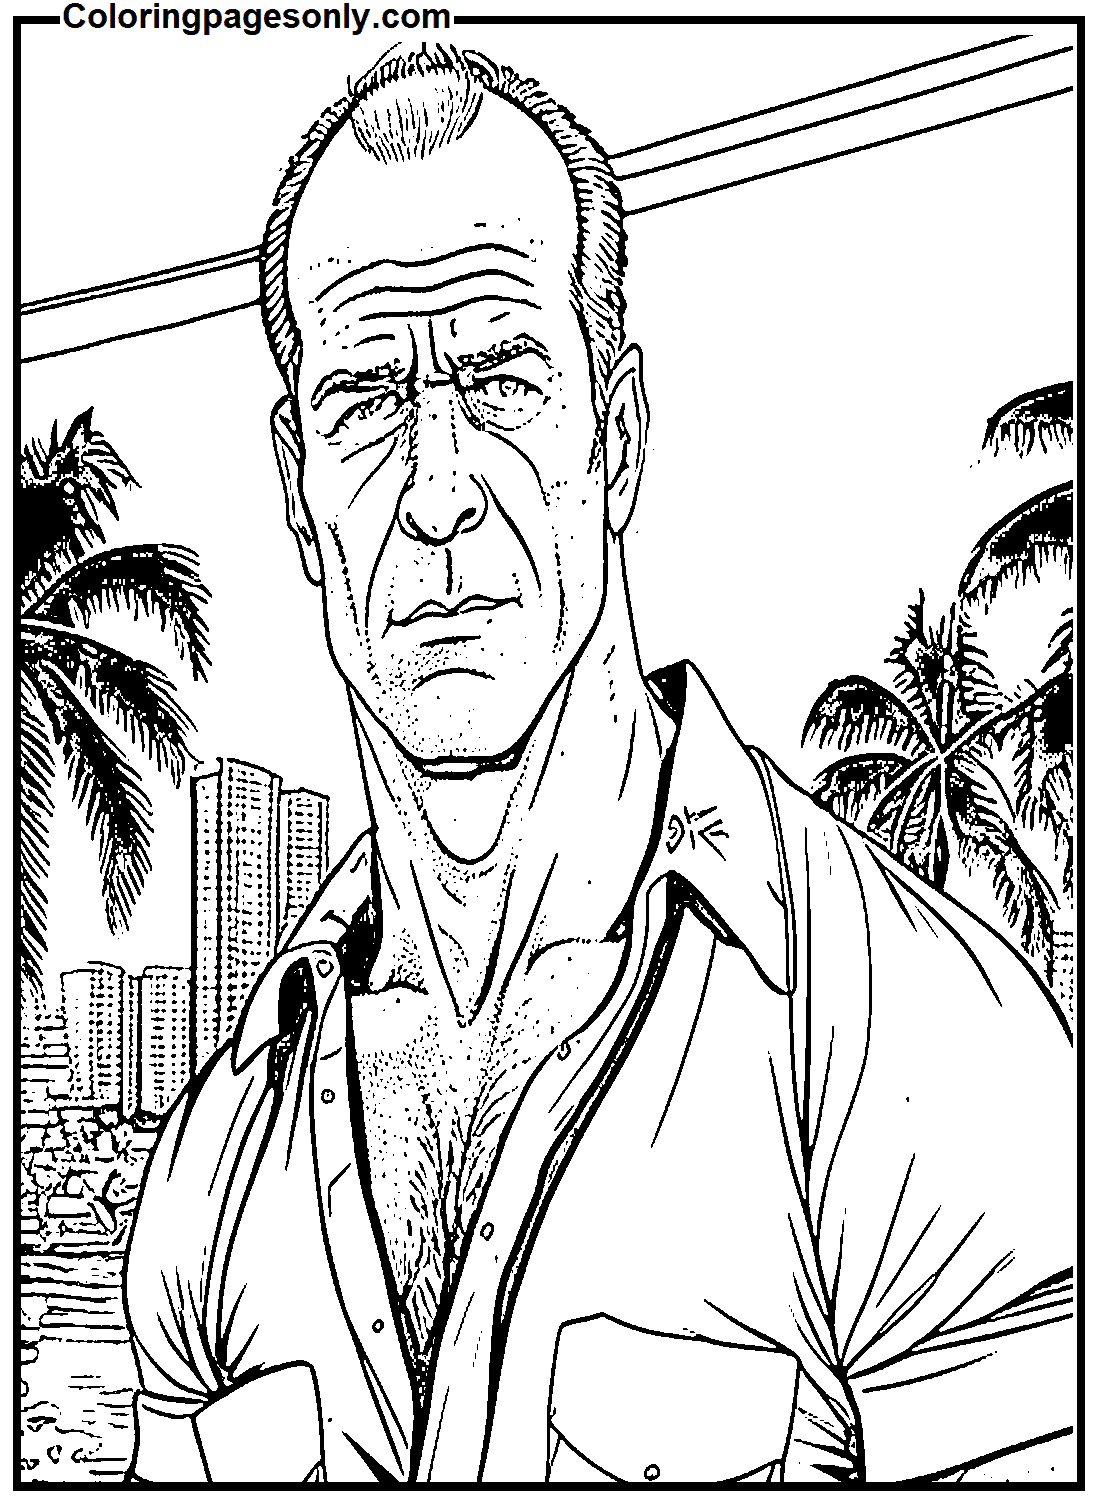 Bruce Willis As John McClane Coloring Pages